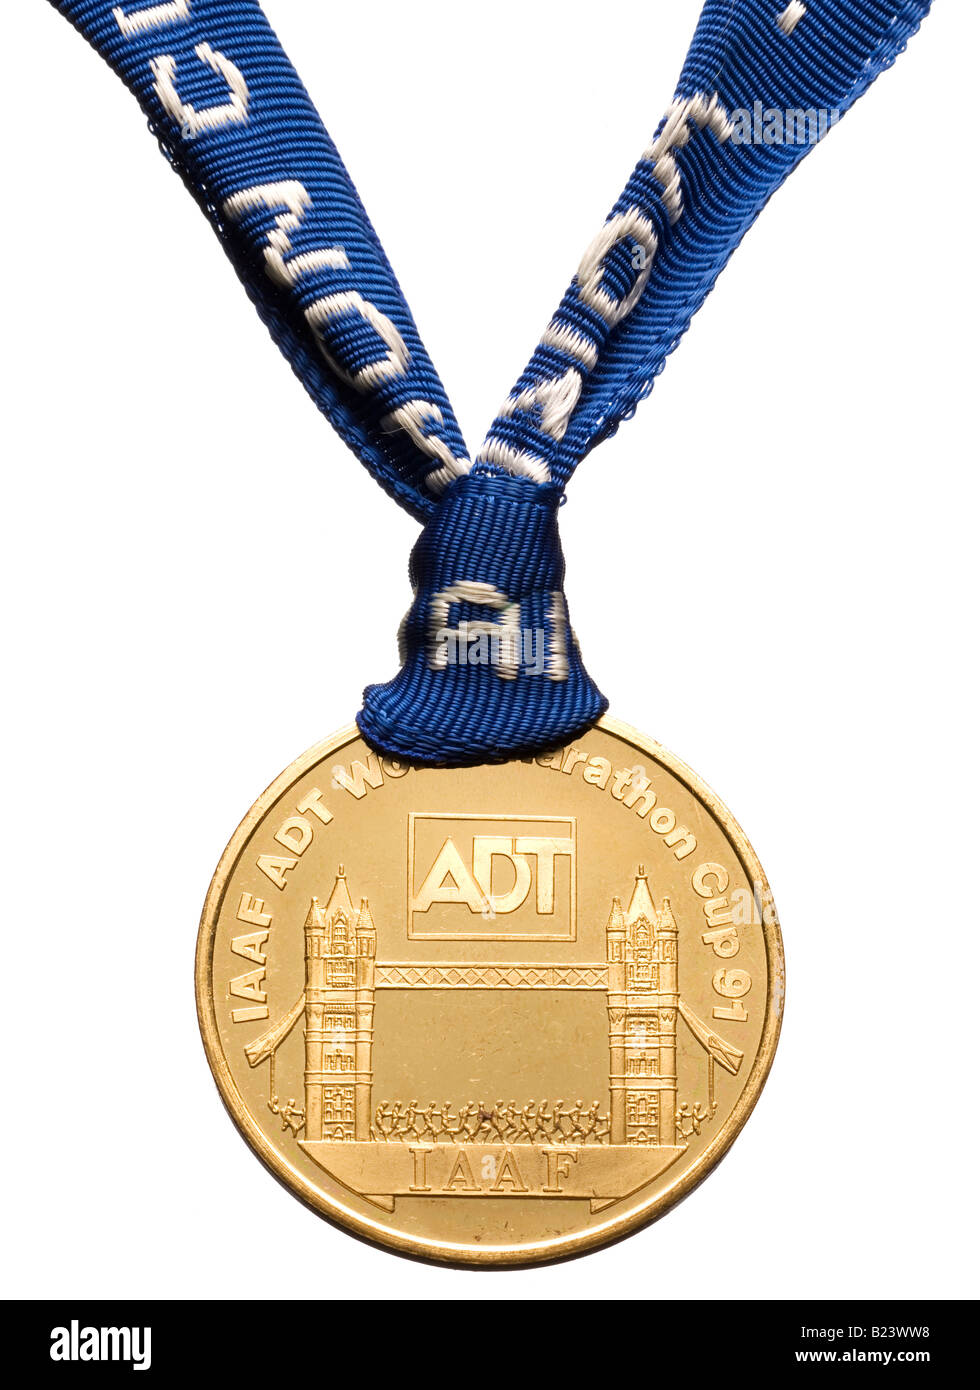 London marathon medal hires stock photography and images Alamy